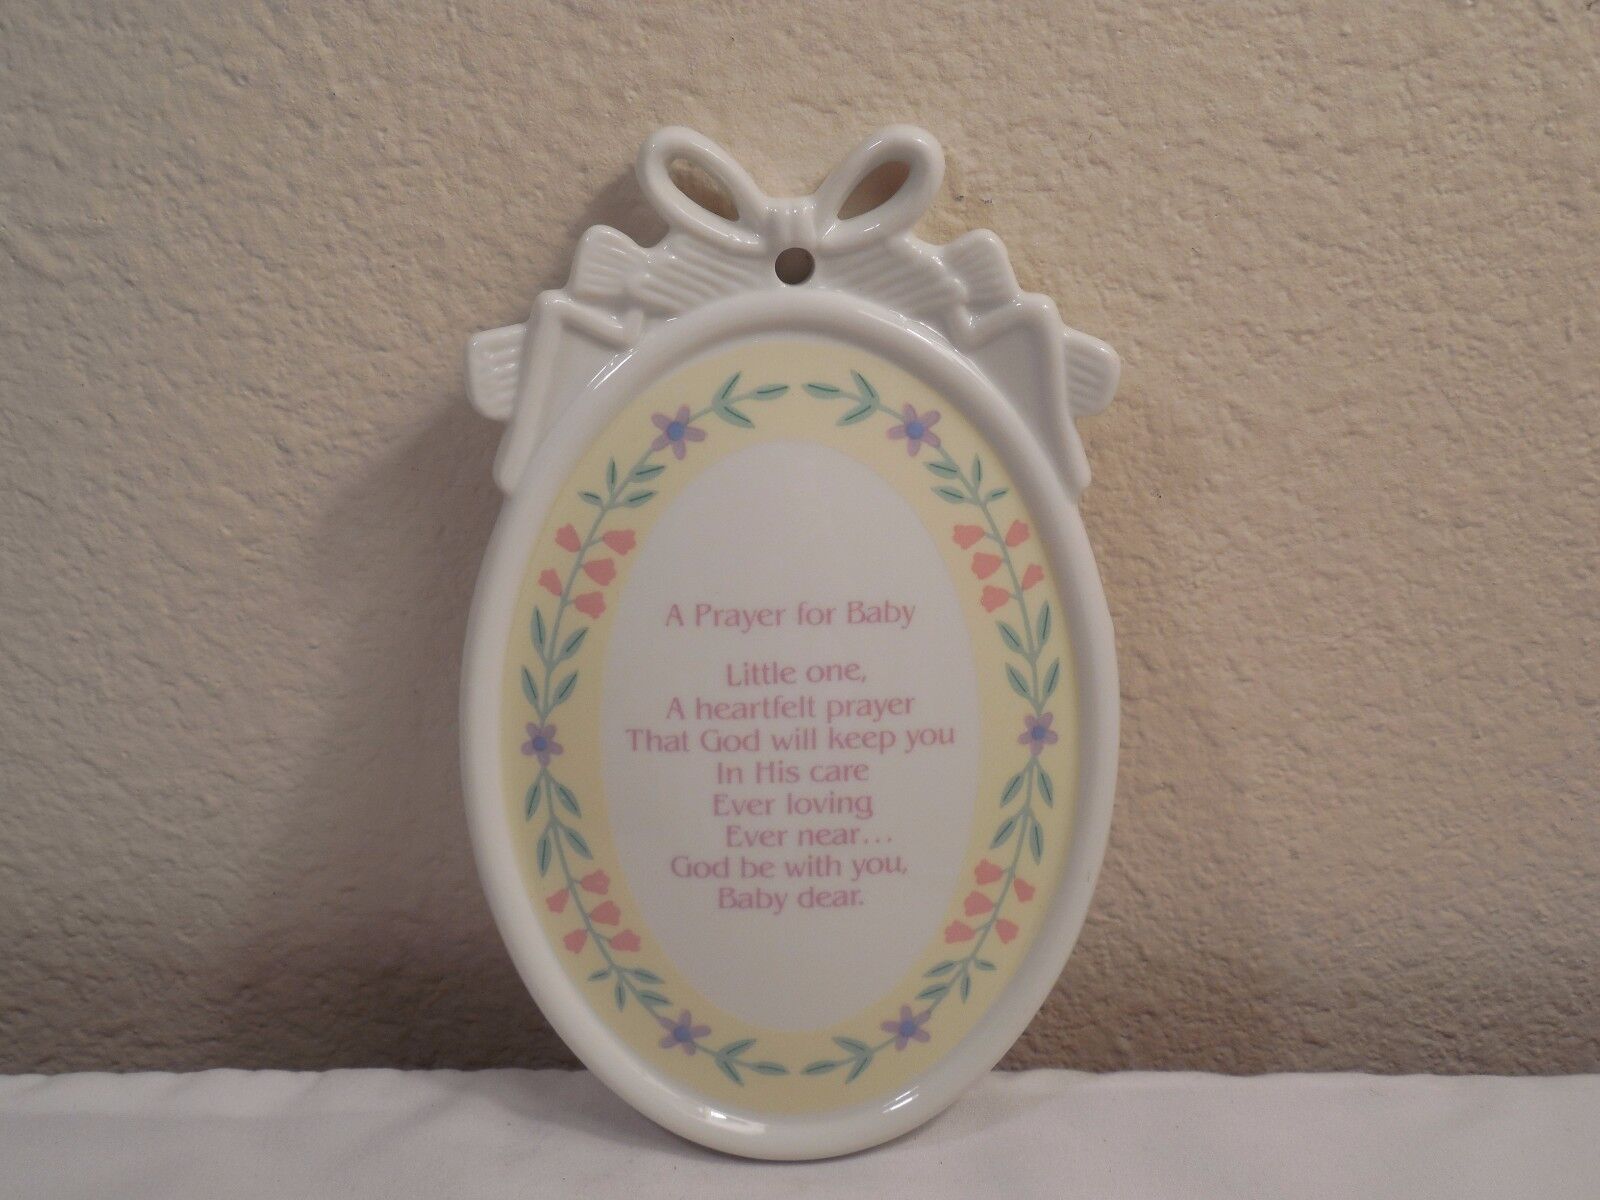 Paula's Cherished Sentiments Porcelain Plaque "A Prayer For Baby" ~ 6 1/2" Tall